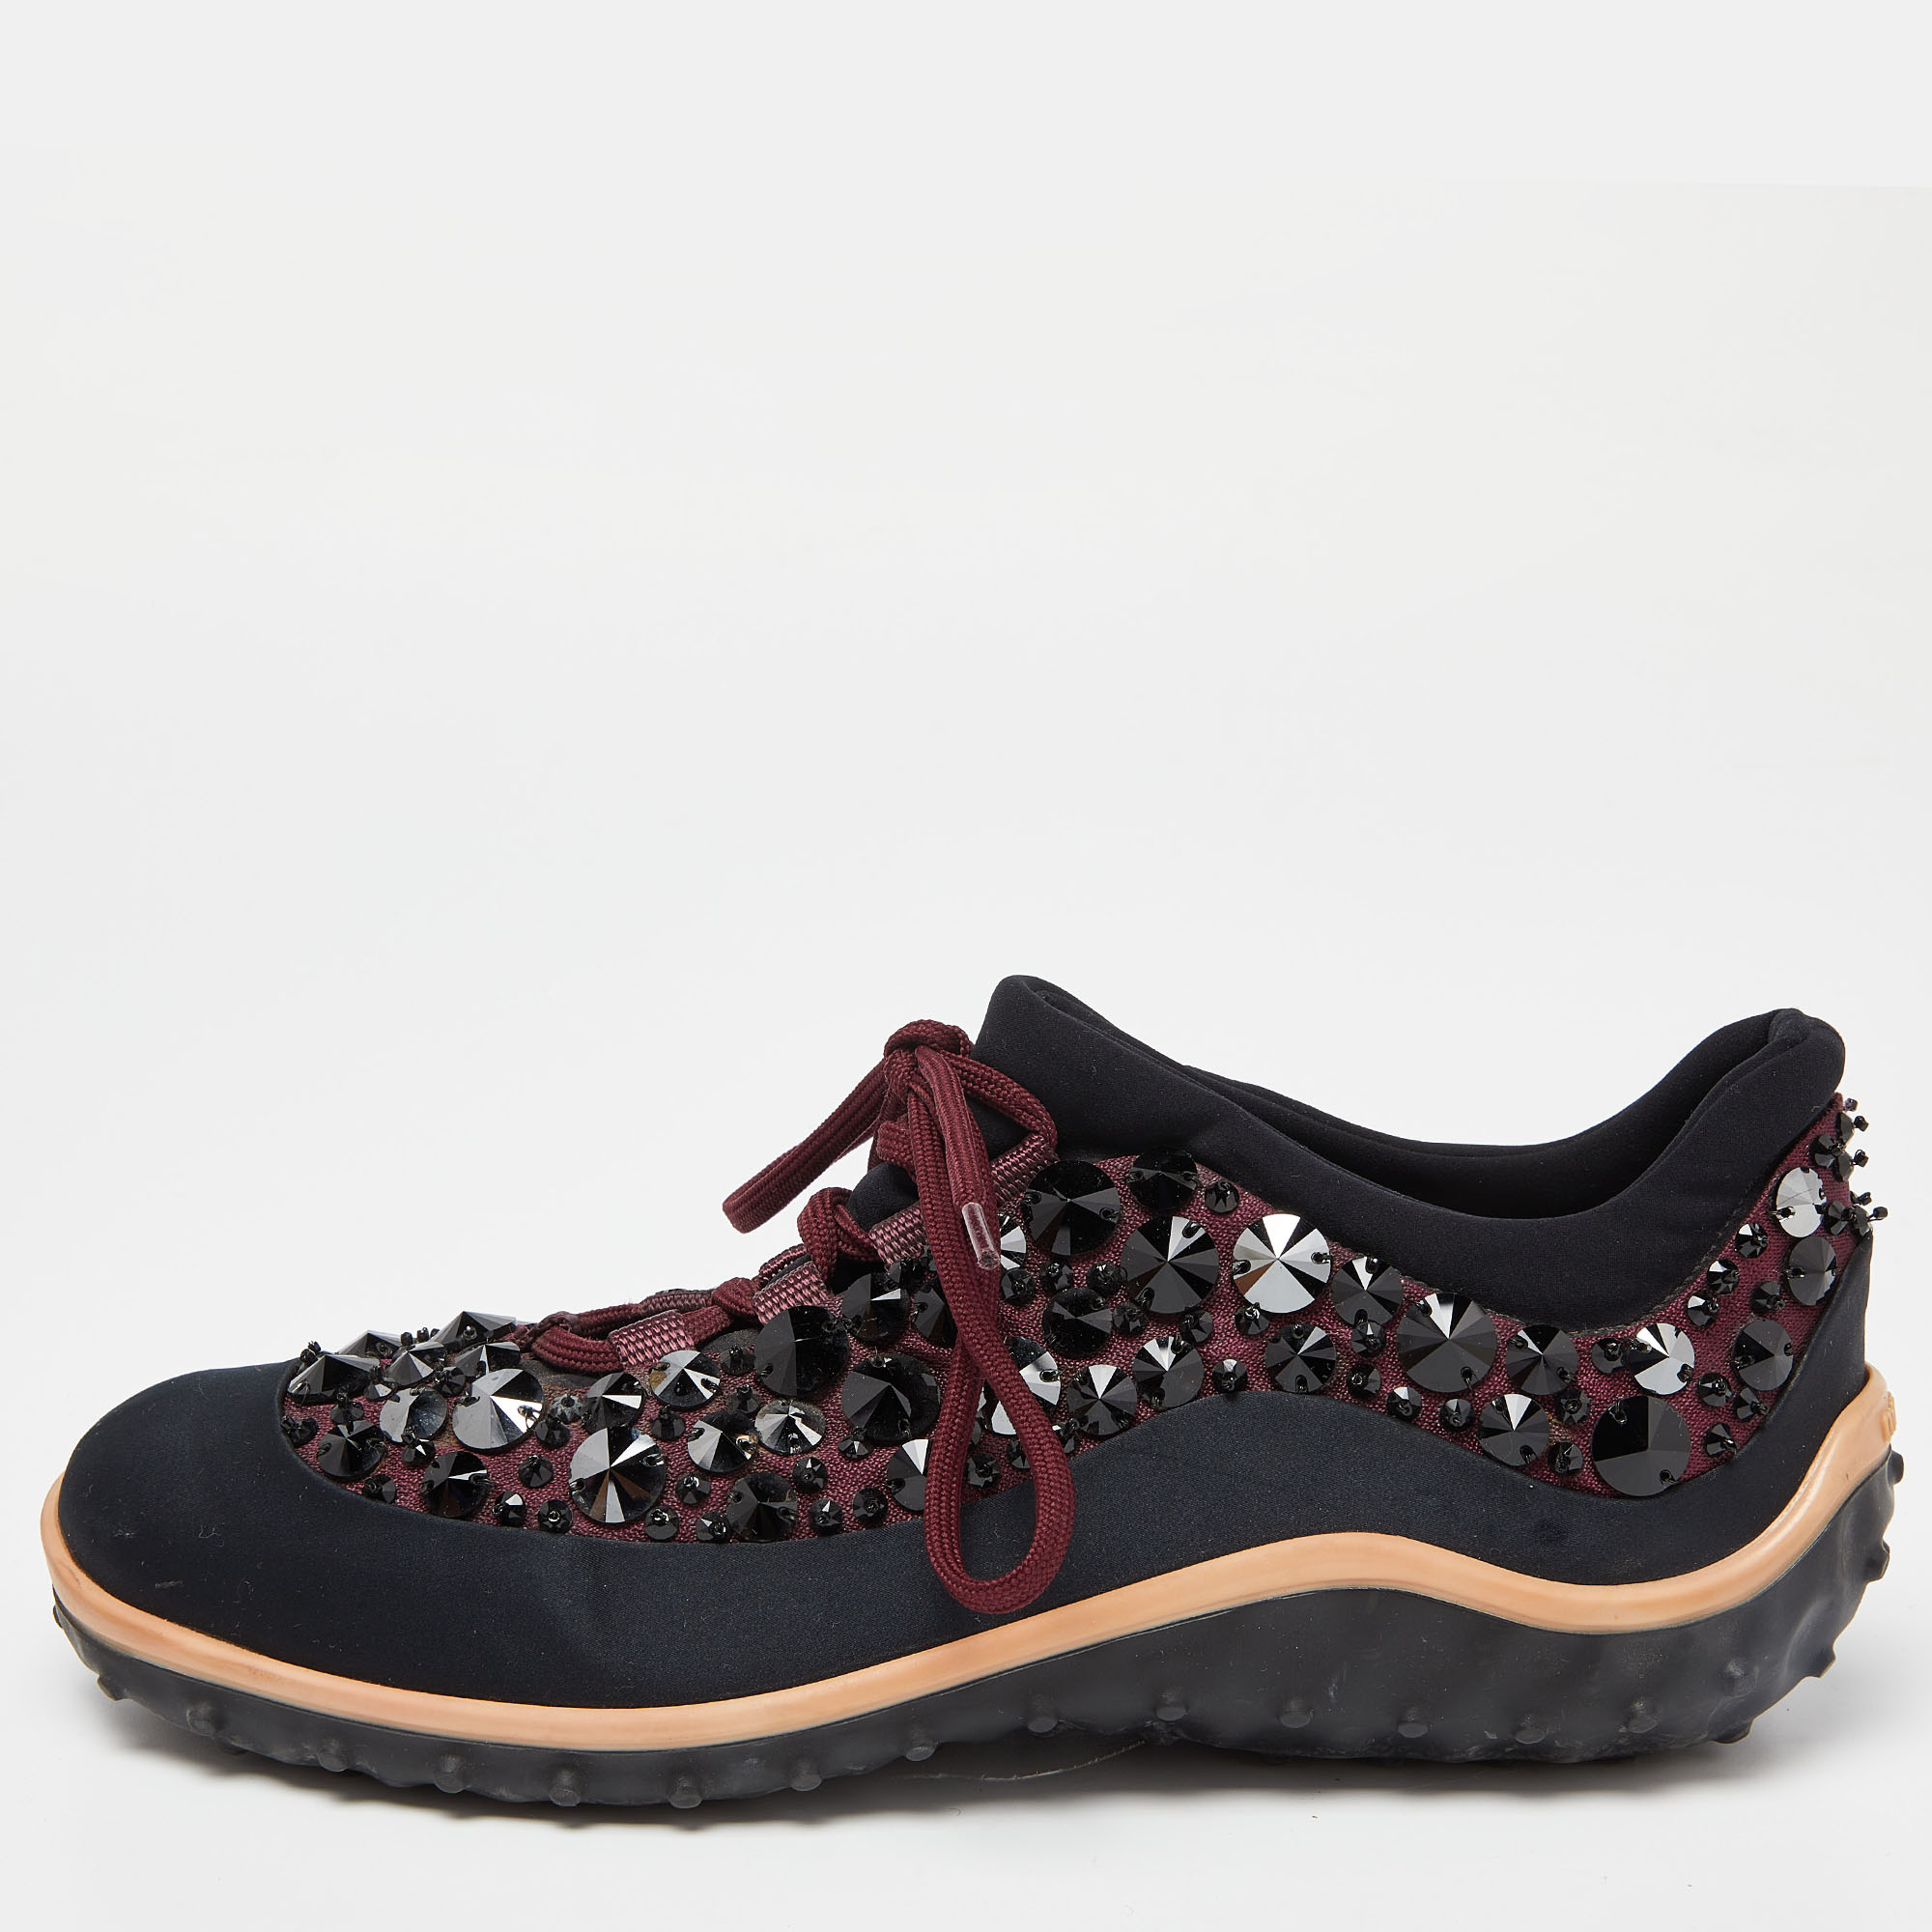 Pre-owned Miu Miu Black/burgundy Embellished Fabric And Satin Astro Trainers Size 39